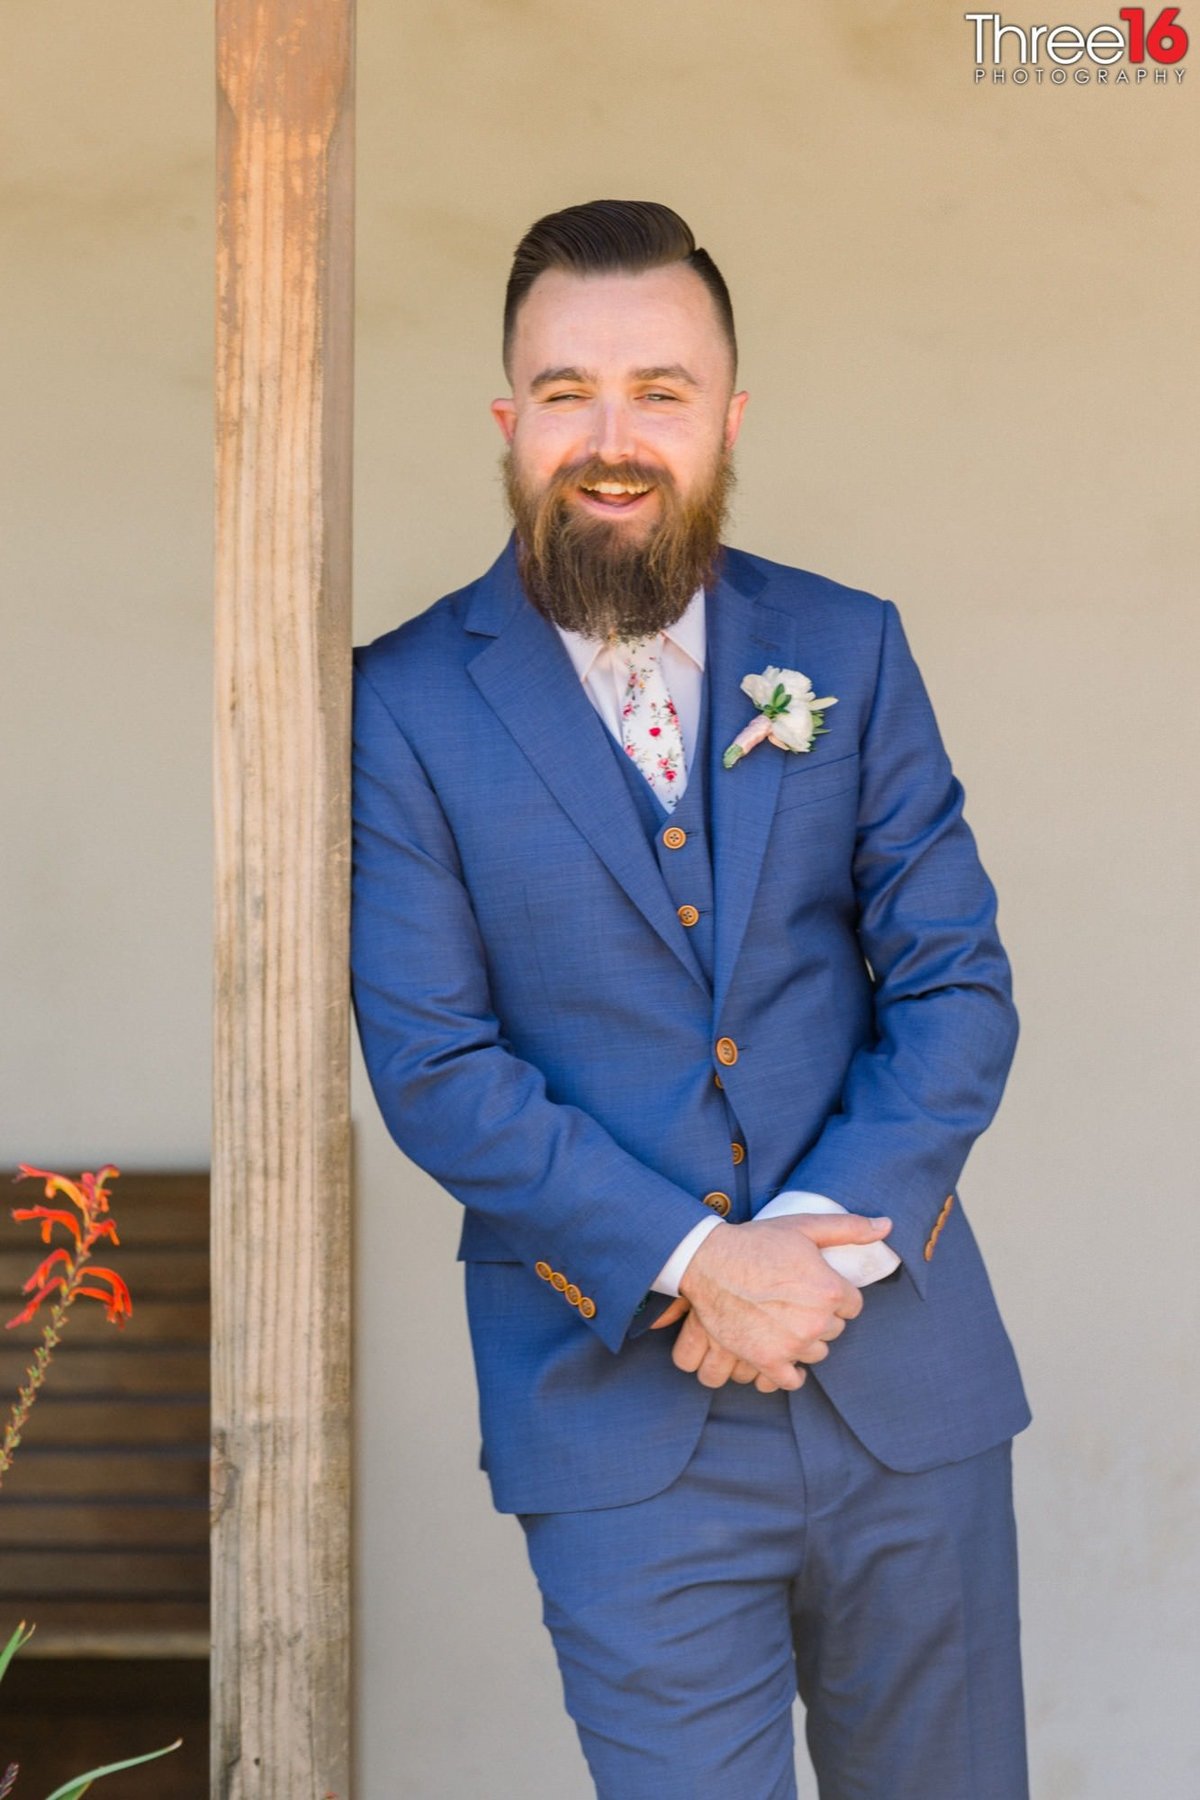 Groom leans up against a post as he poses for photos with a large smile on his face